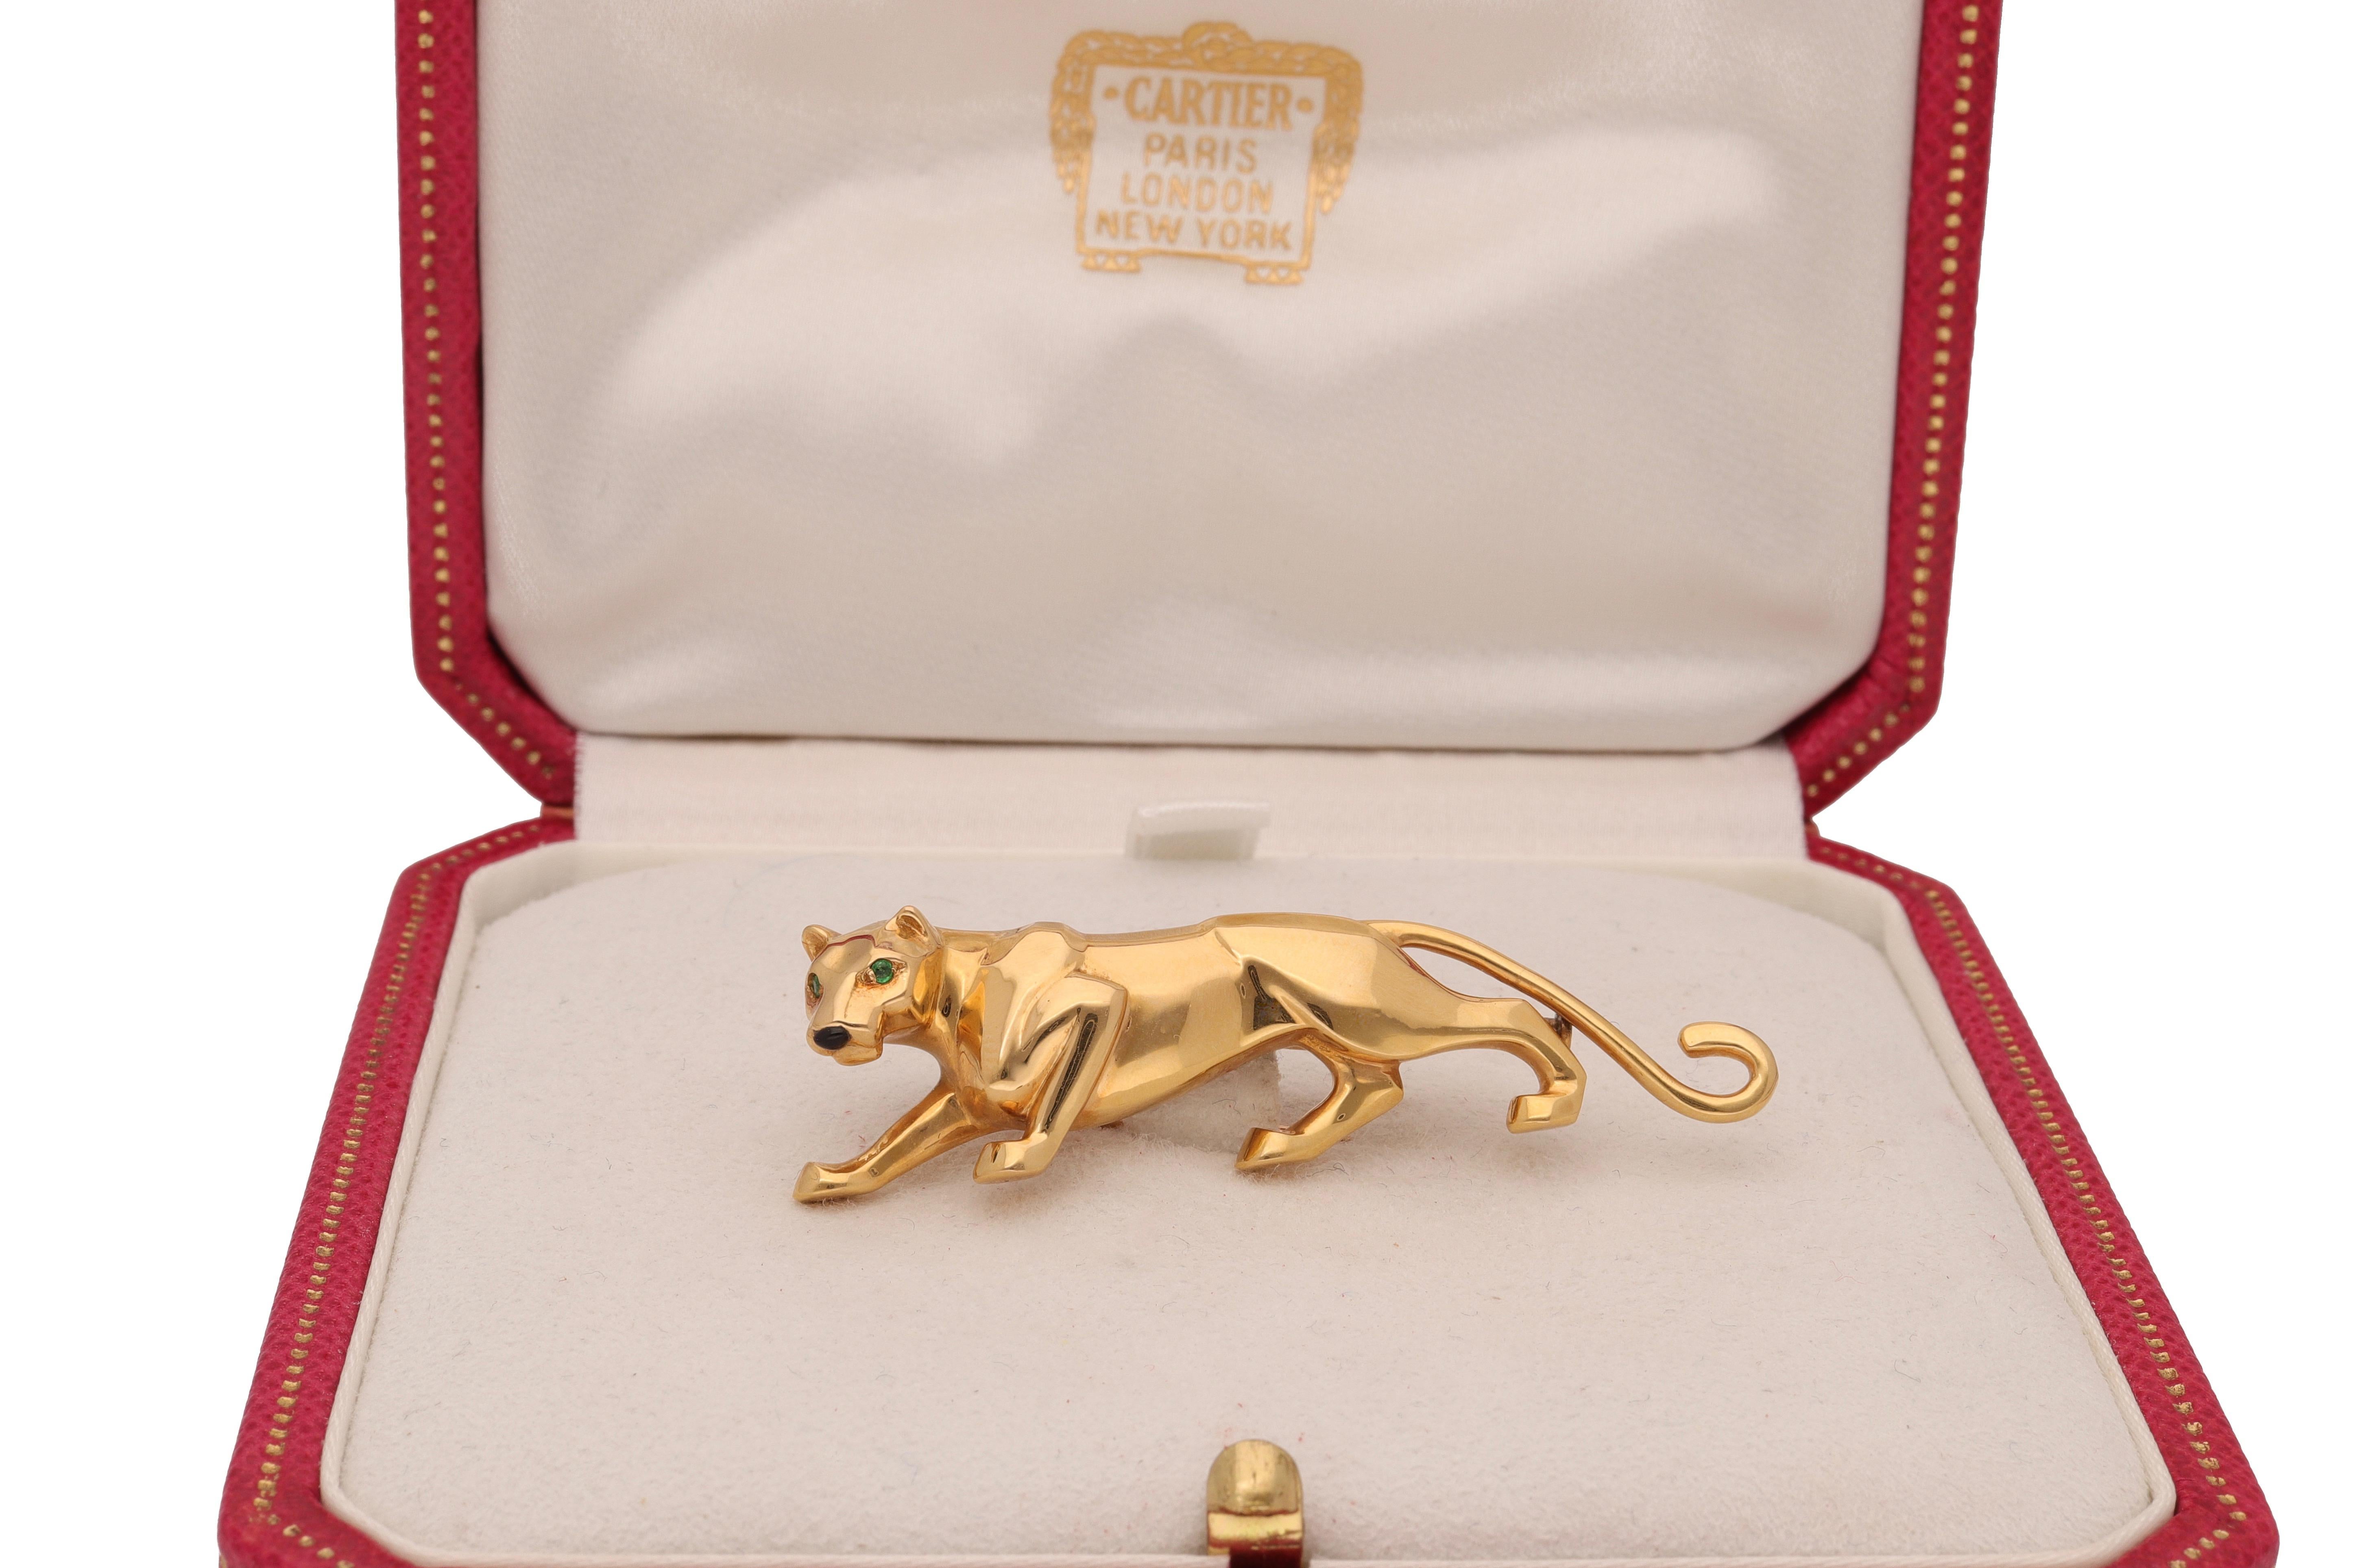 Round Cut Iconic Cartier 18 Karat Yellow Gold Panthere Brooch